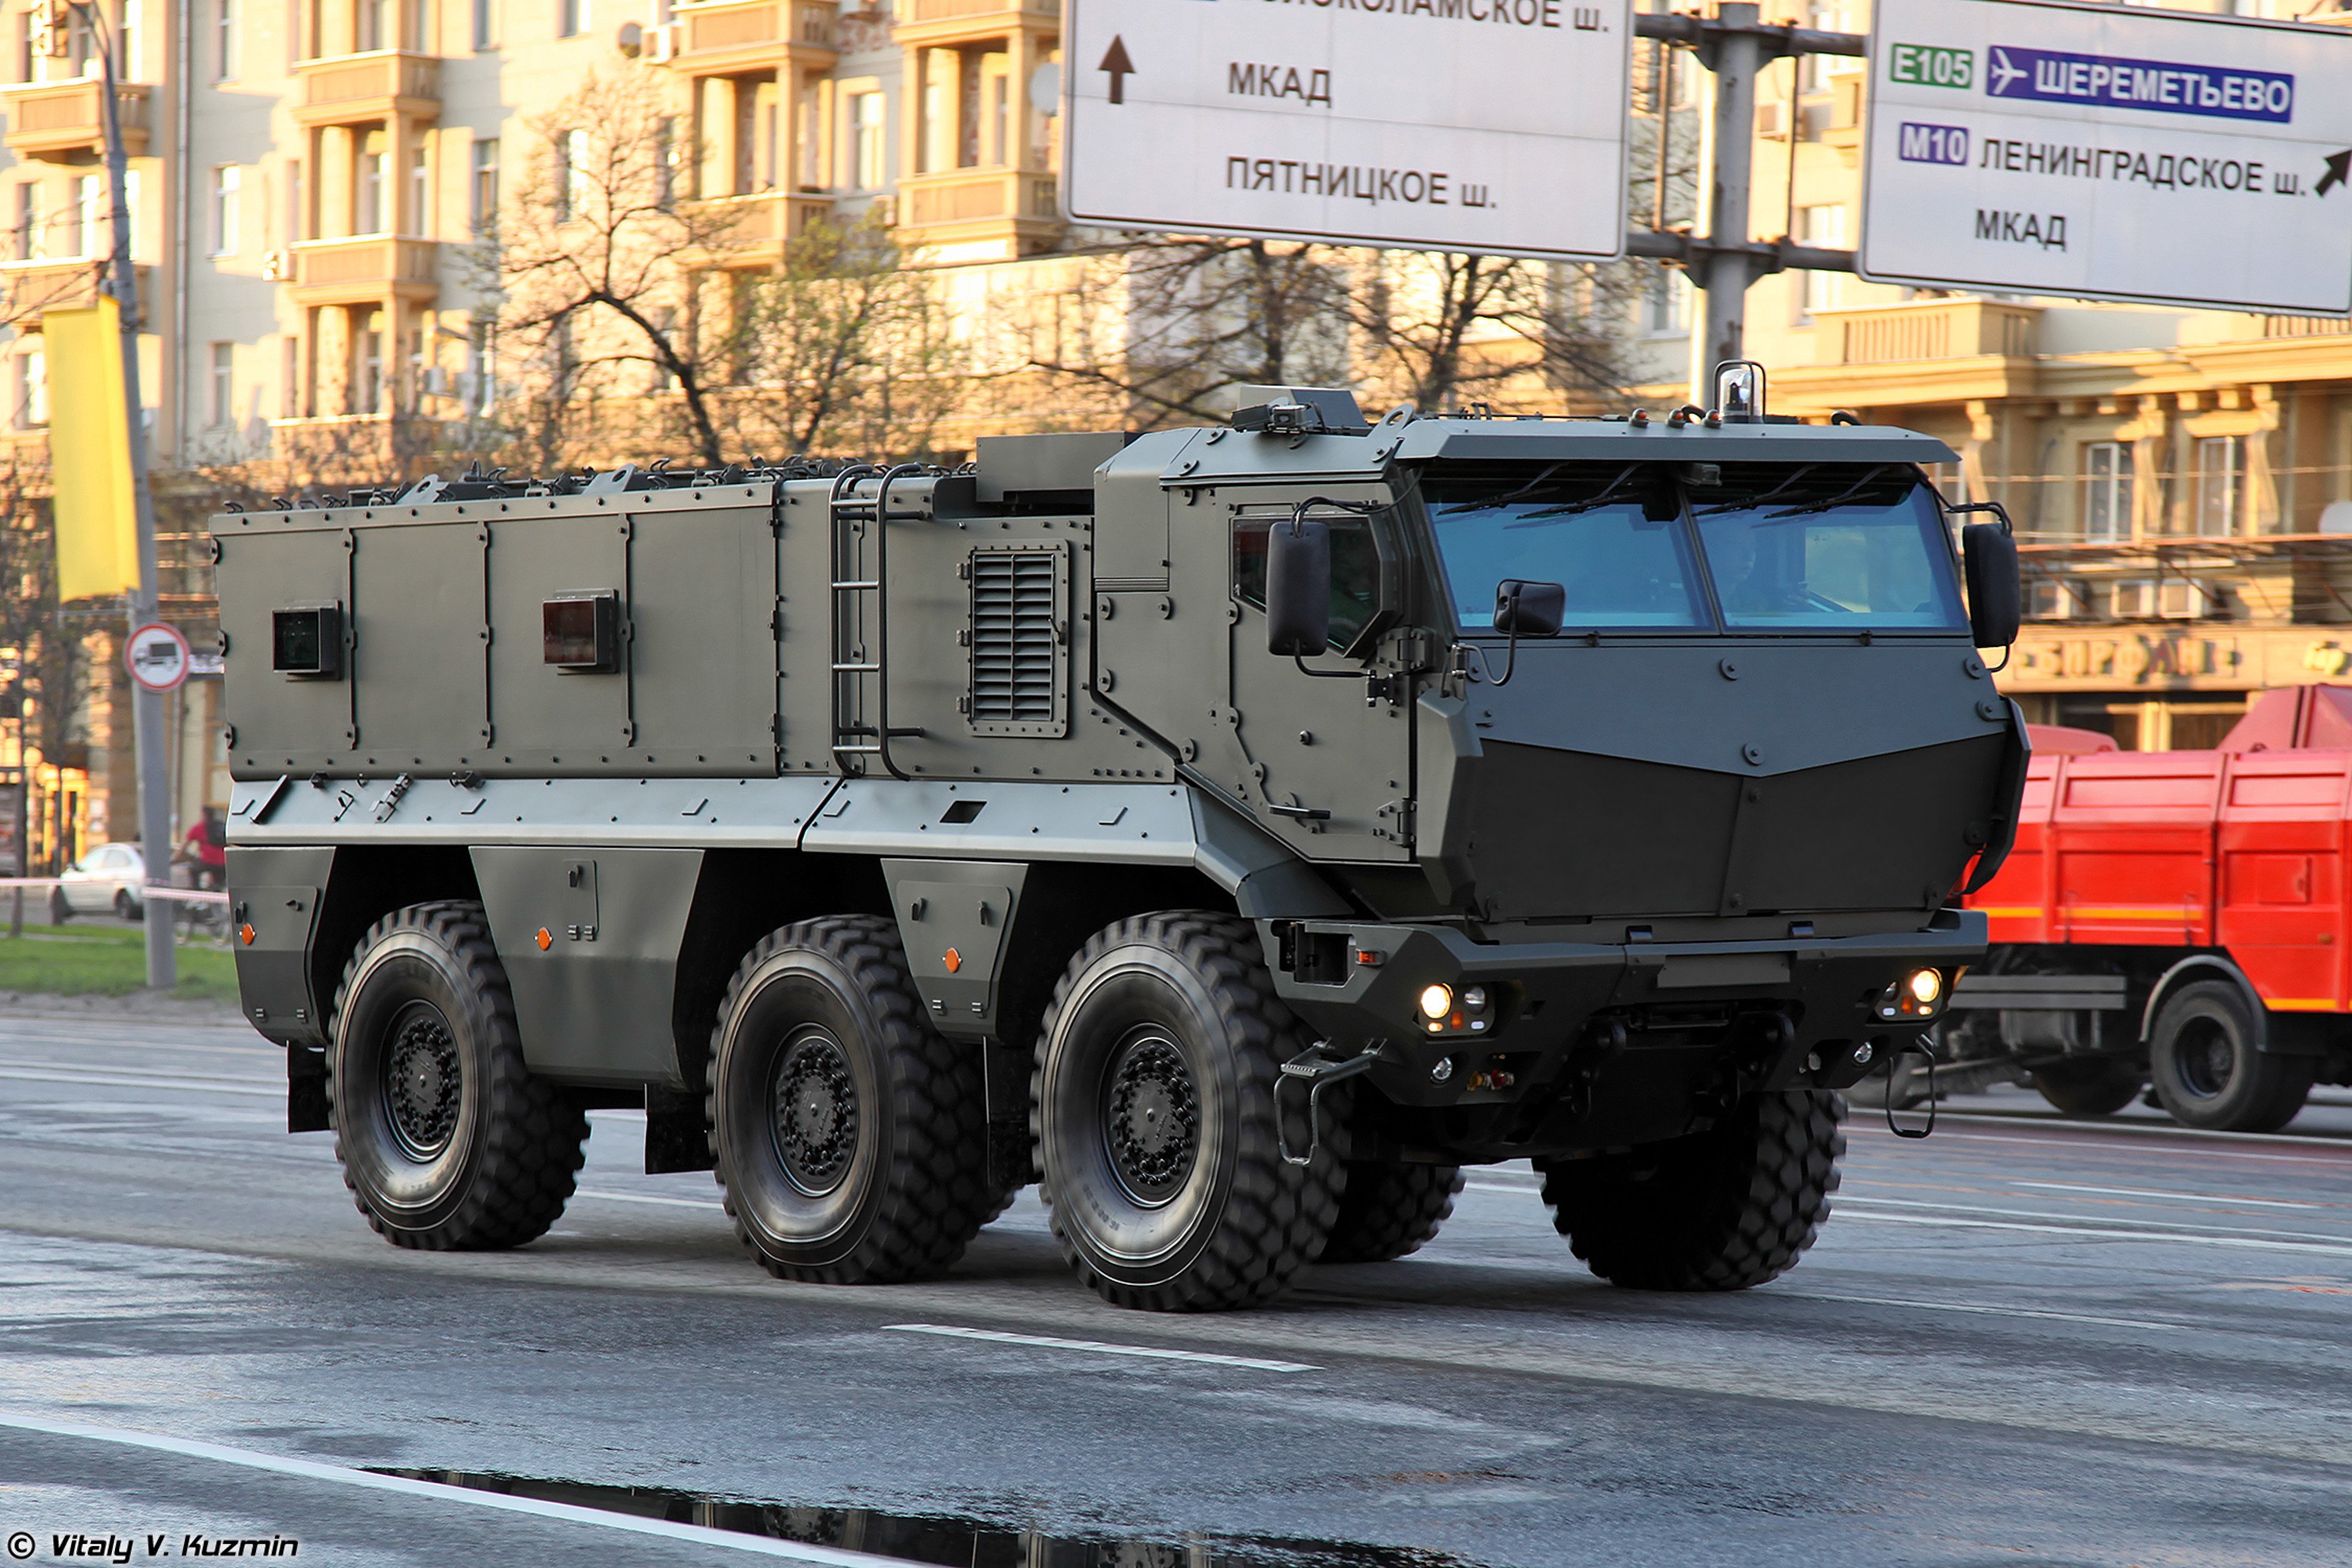 april 29th, Rehearsal, Of, 2014, Victory, Day, Parade, In, Moscow, Russia, Red, Star, Russian, Military, Army, Kamaz 63968, Typhoon k, Mrap, Vehicle, 3, 4000x2667 Wallpaper